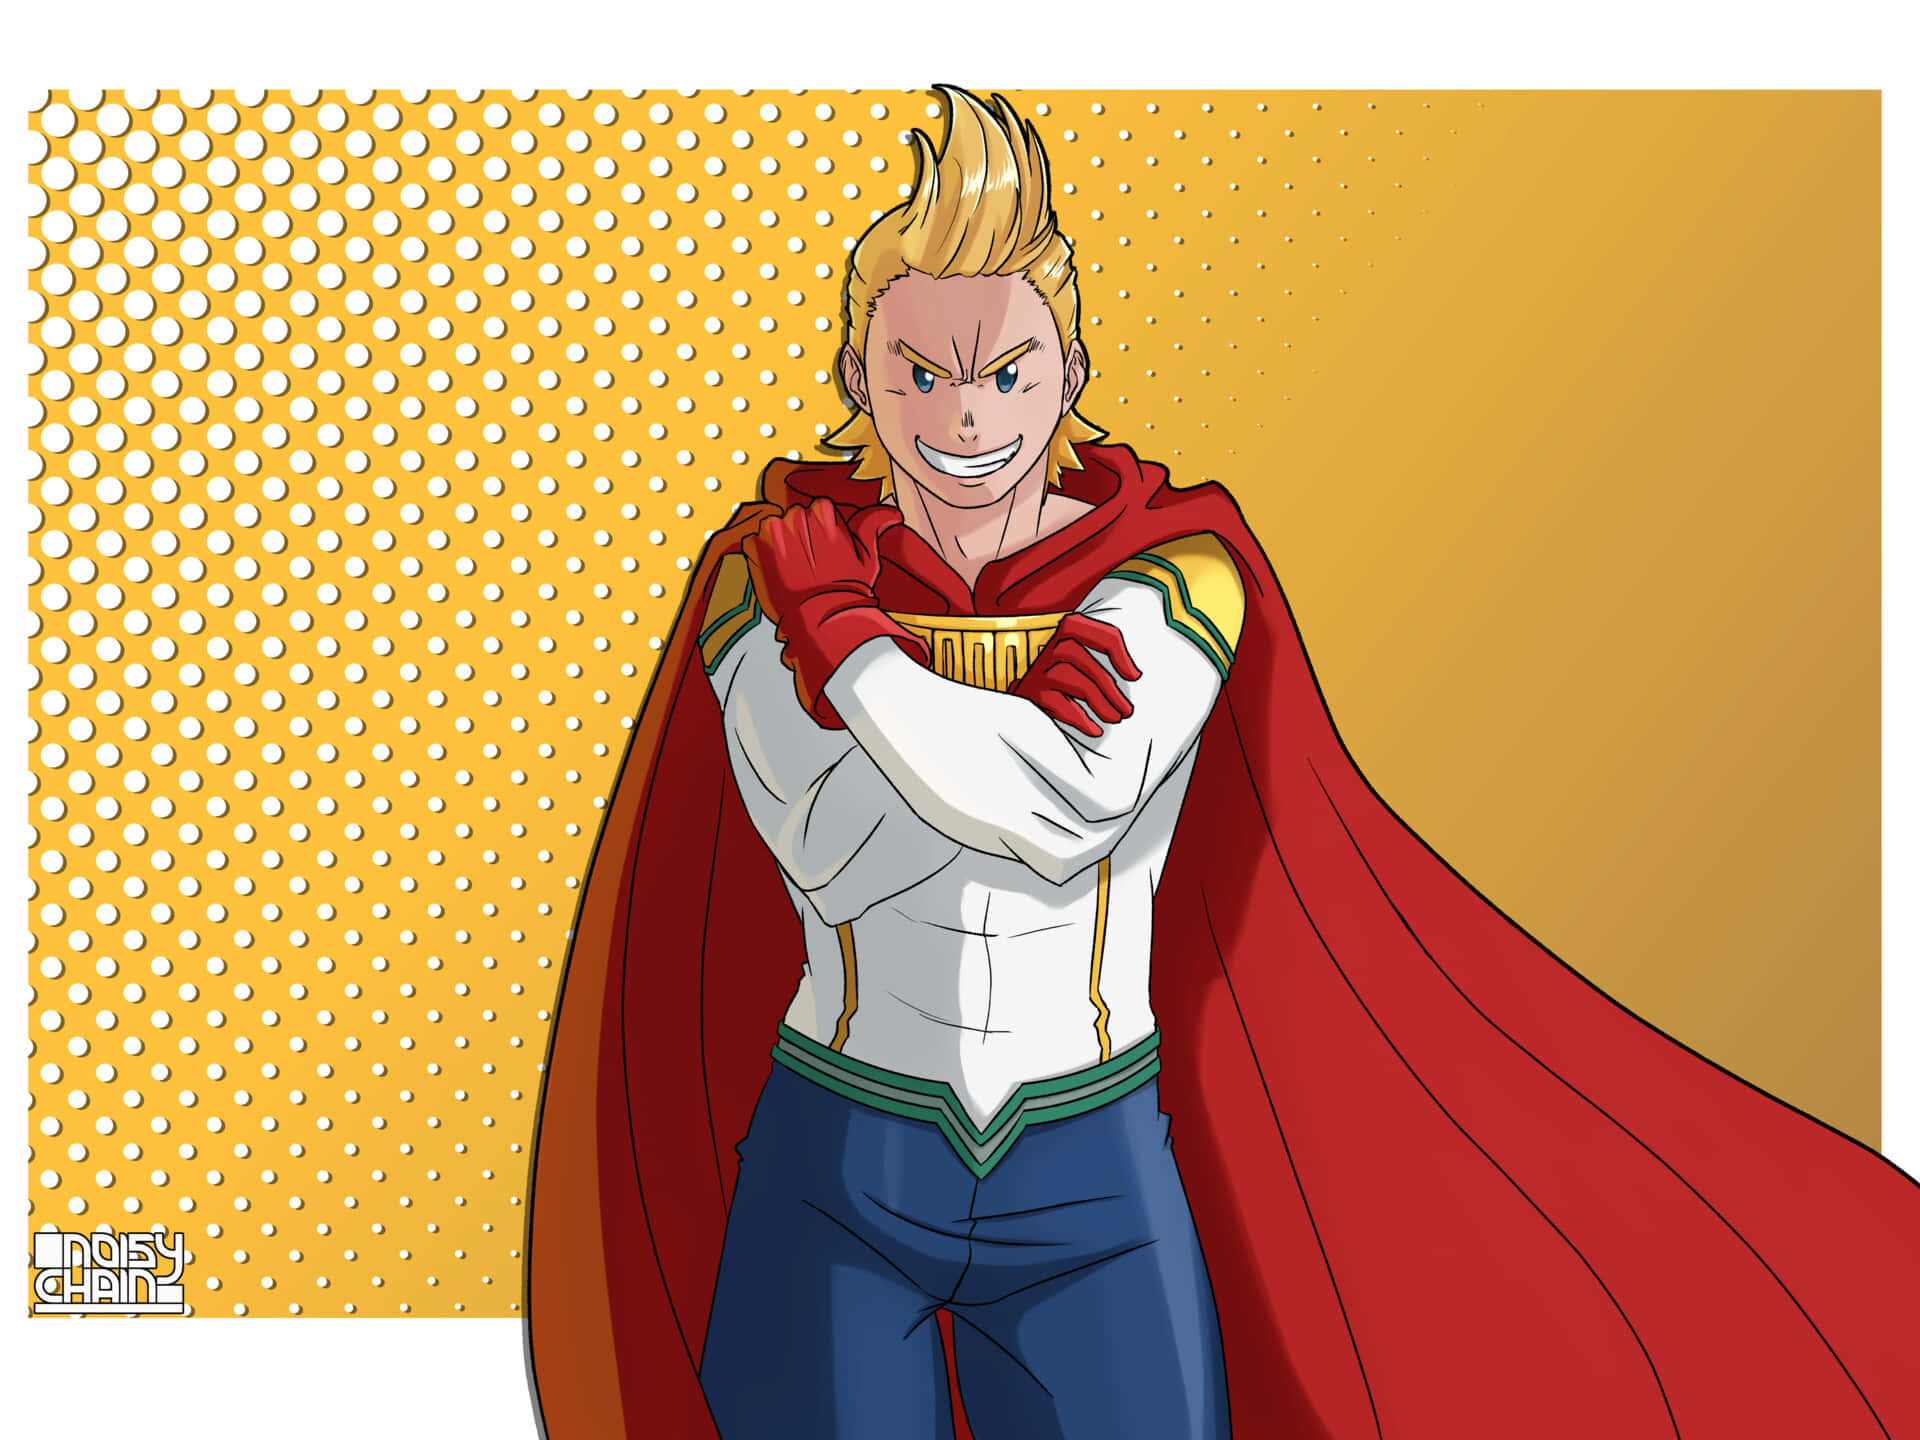 Mirio Togata shows his true quirk or superpower in this animated series! Wallpaper